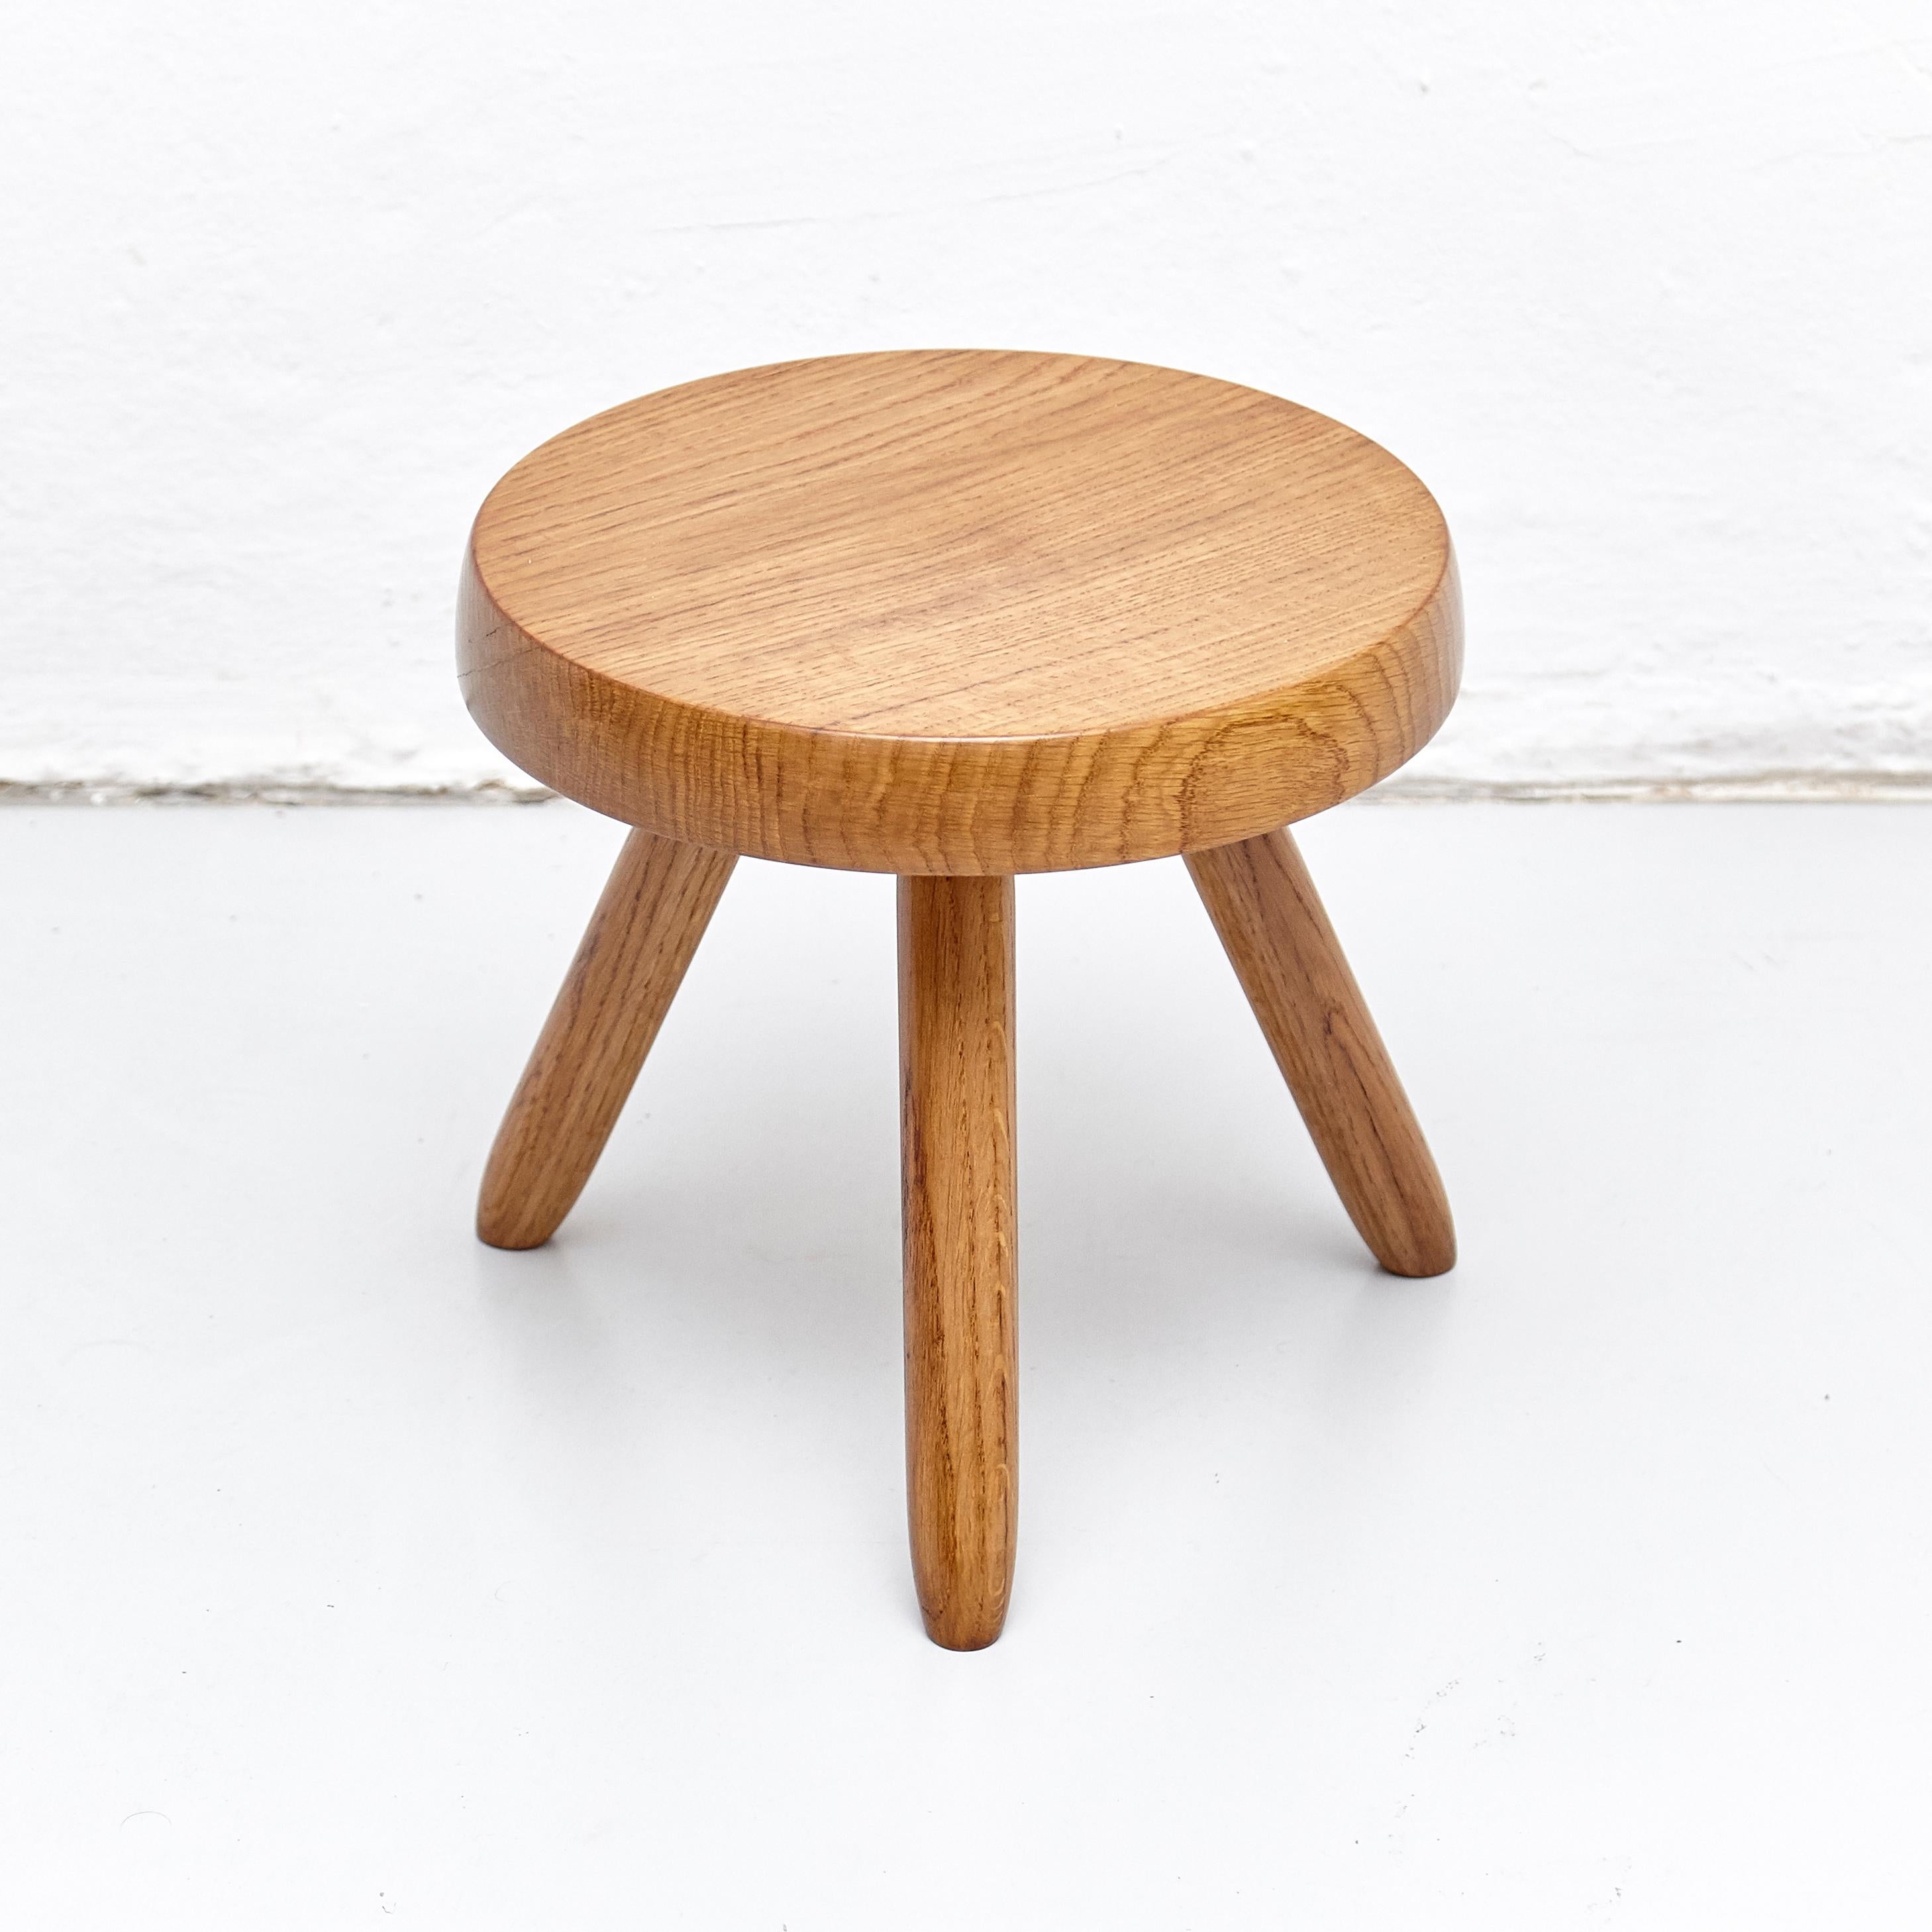 Stool designed in the style of Charlotte Perriand.
Made by unknown manufacturer.

We offer free worldwide shipping for this piece.

In good original condition, preserving a beautiful patina, with minor wear consistent with age and use.